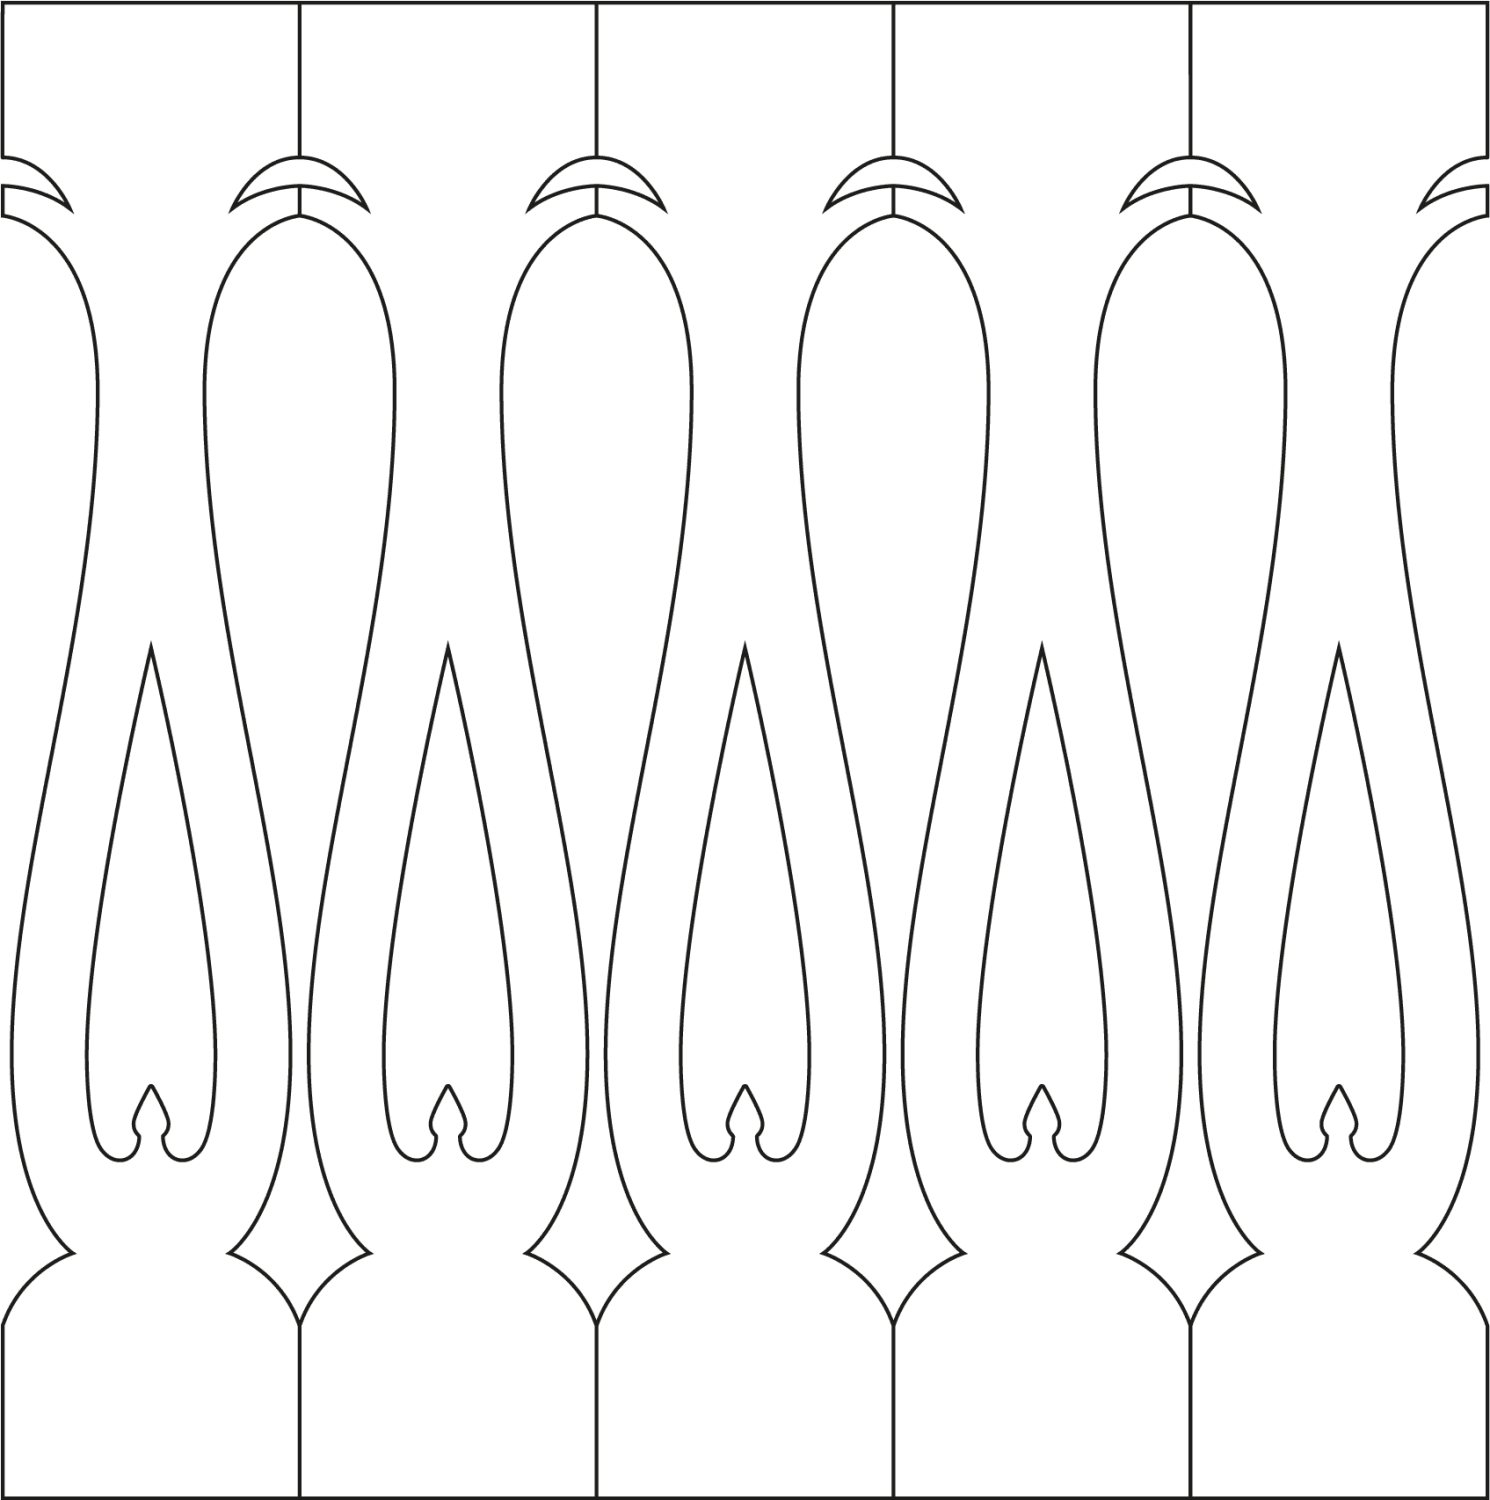 Baluster 026 - The drawing shows 5 Decorative victorian sawn balusters & pickets together